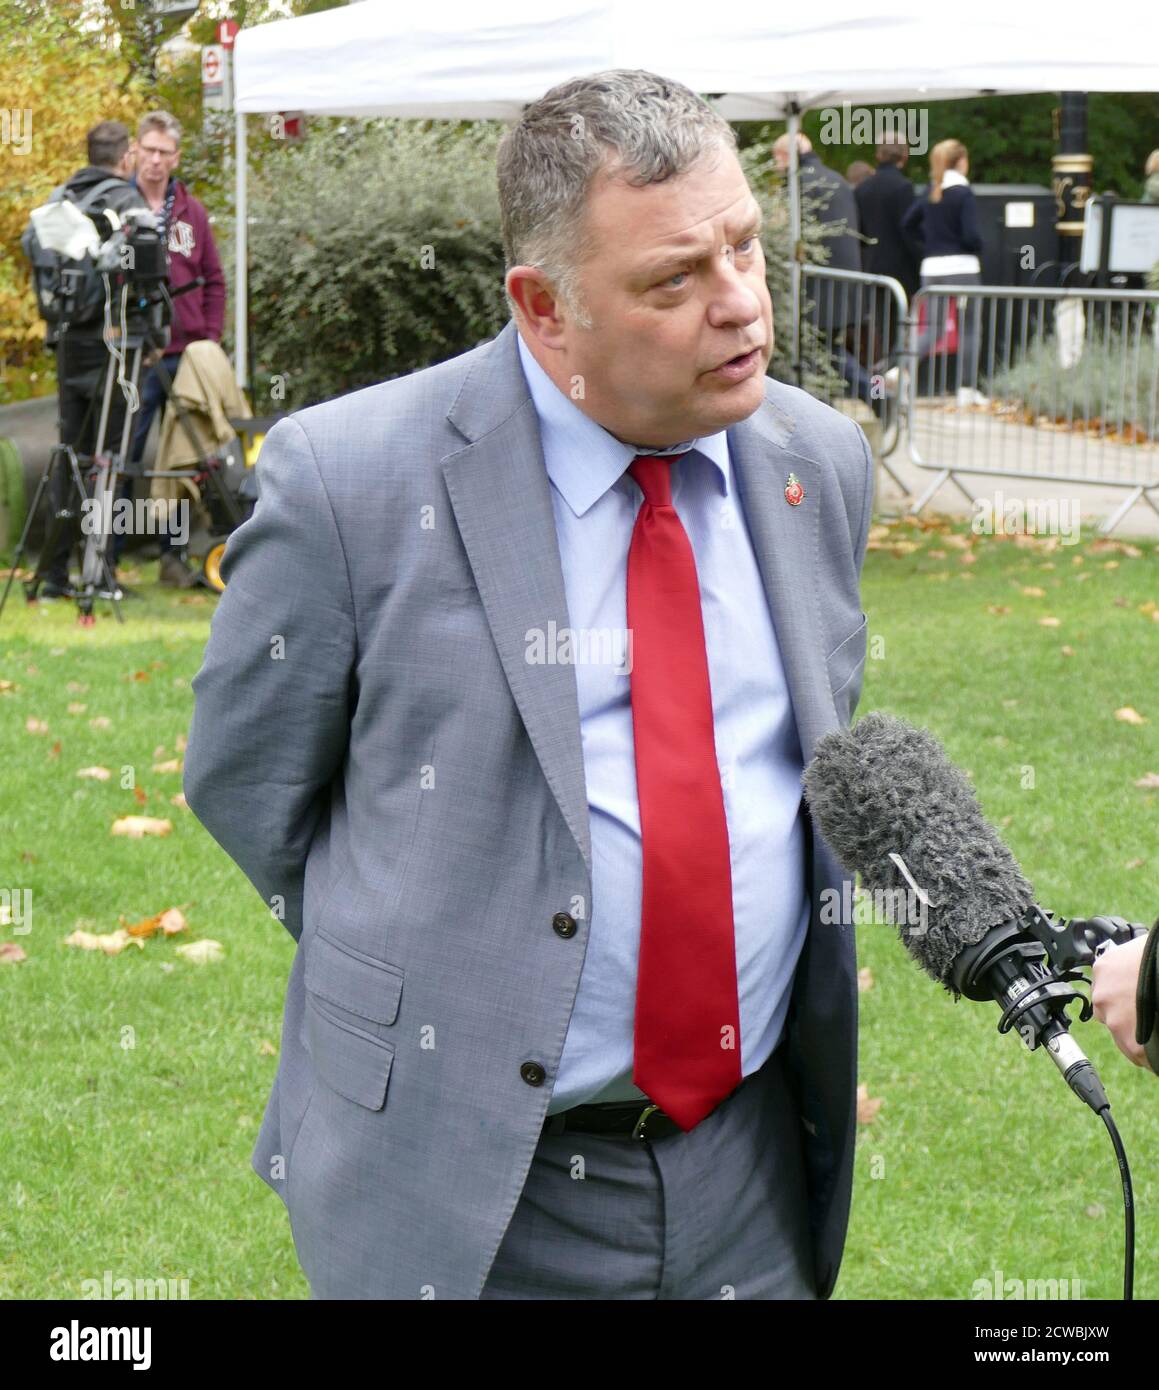 Photograph of Michael Amesbury. Michael Lee Amesbury (1969-) an English Labour Party politician and the current Shadow Minister for Employment. He became the Member of Parliament for Weaver Vale in Cheshire at the general election in June 2017, and was re-elected in 2019 Stock Photo